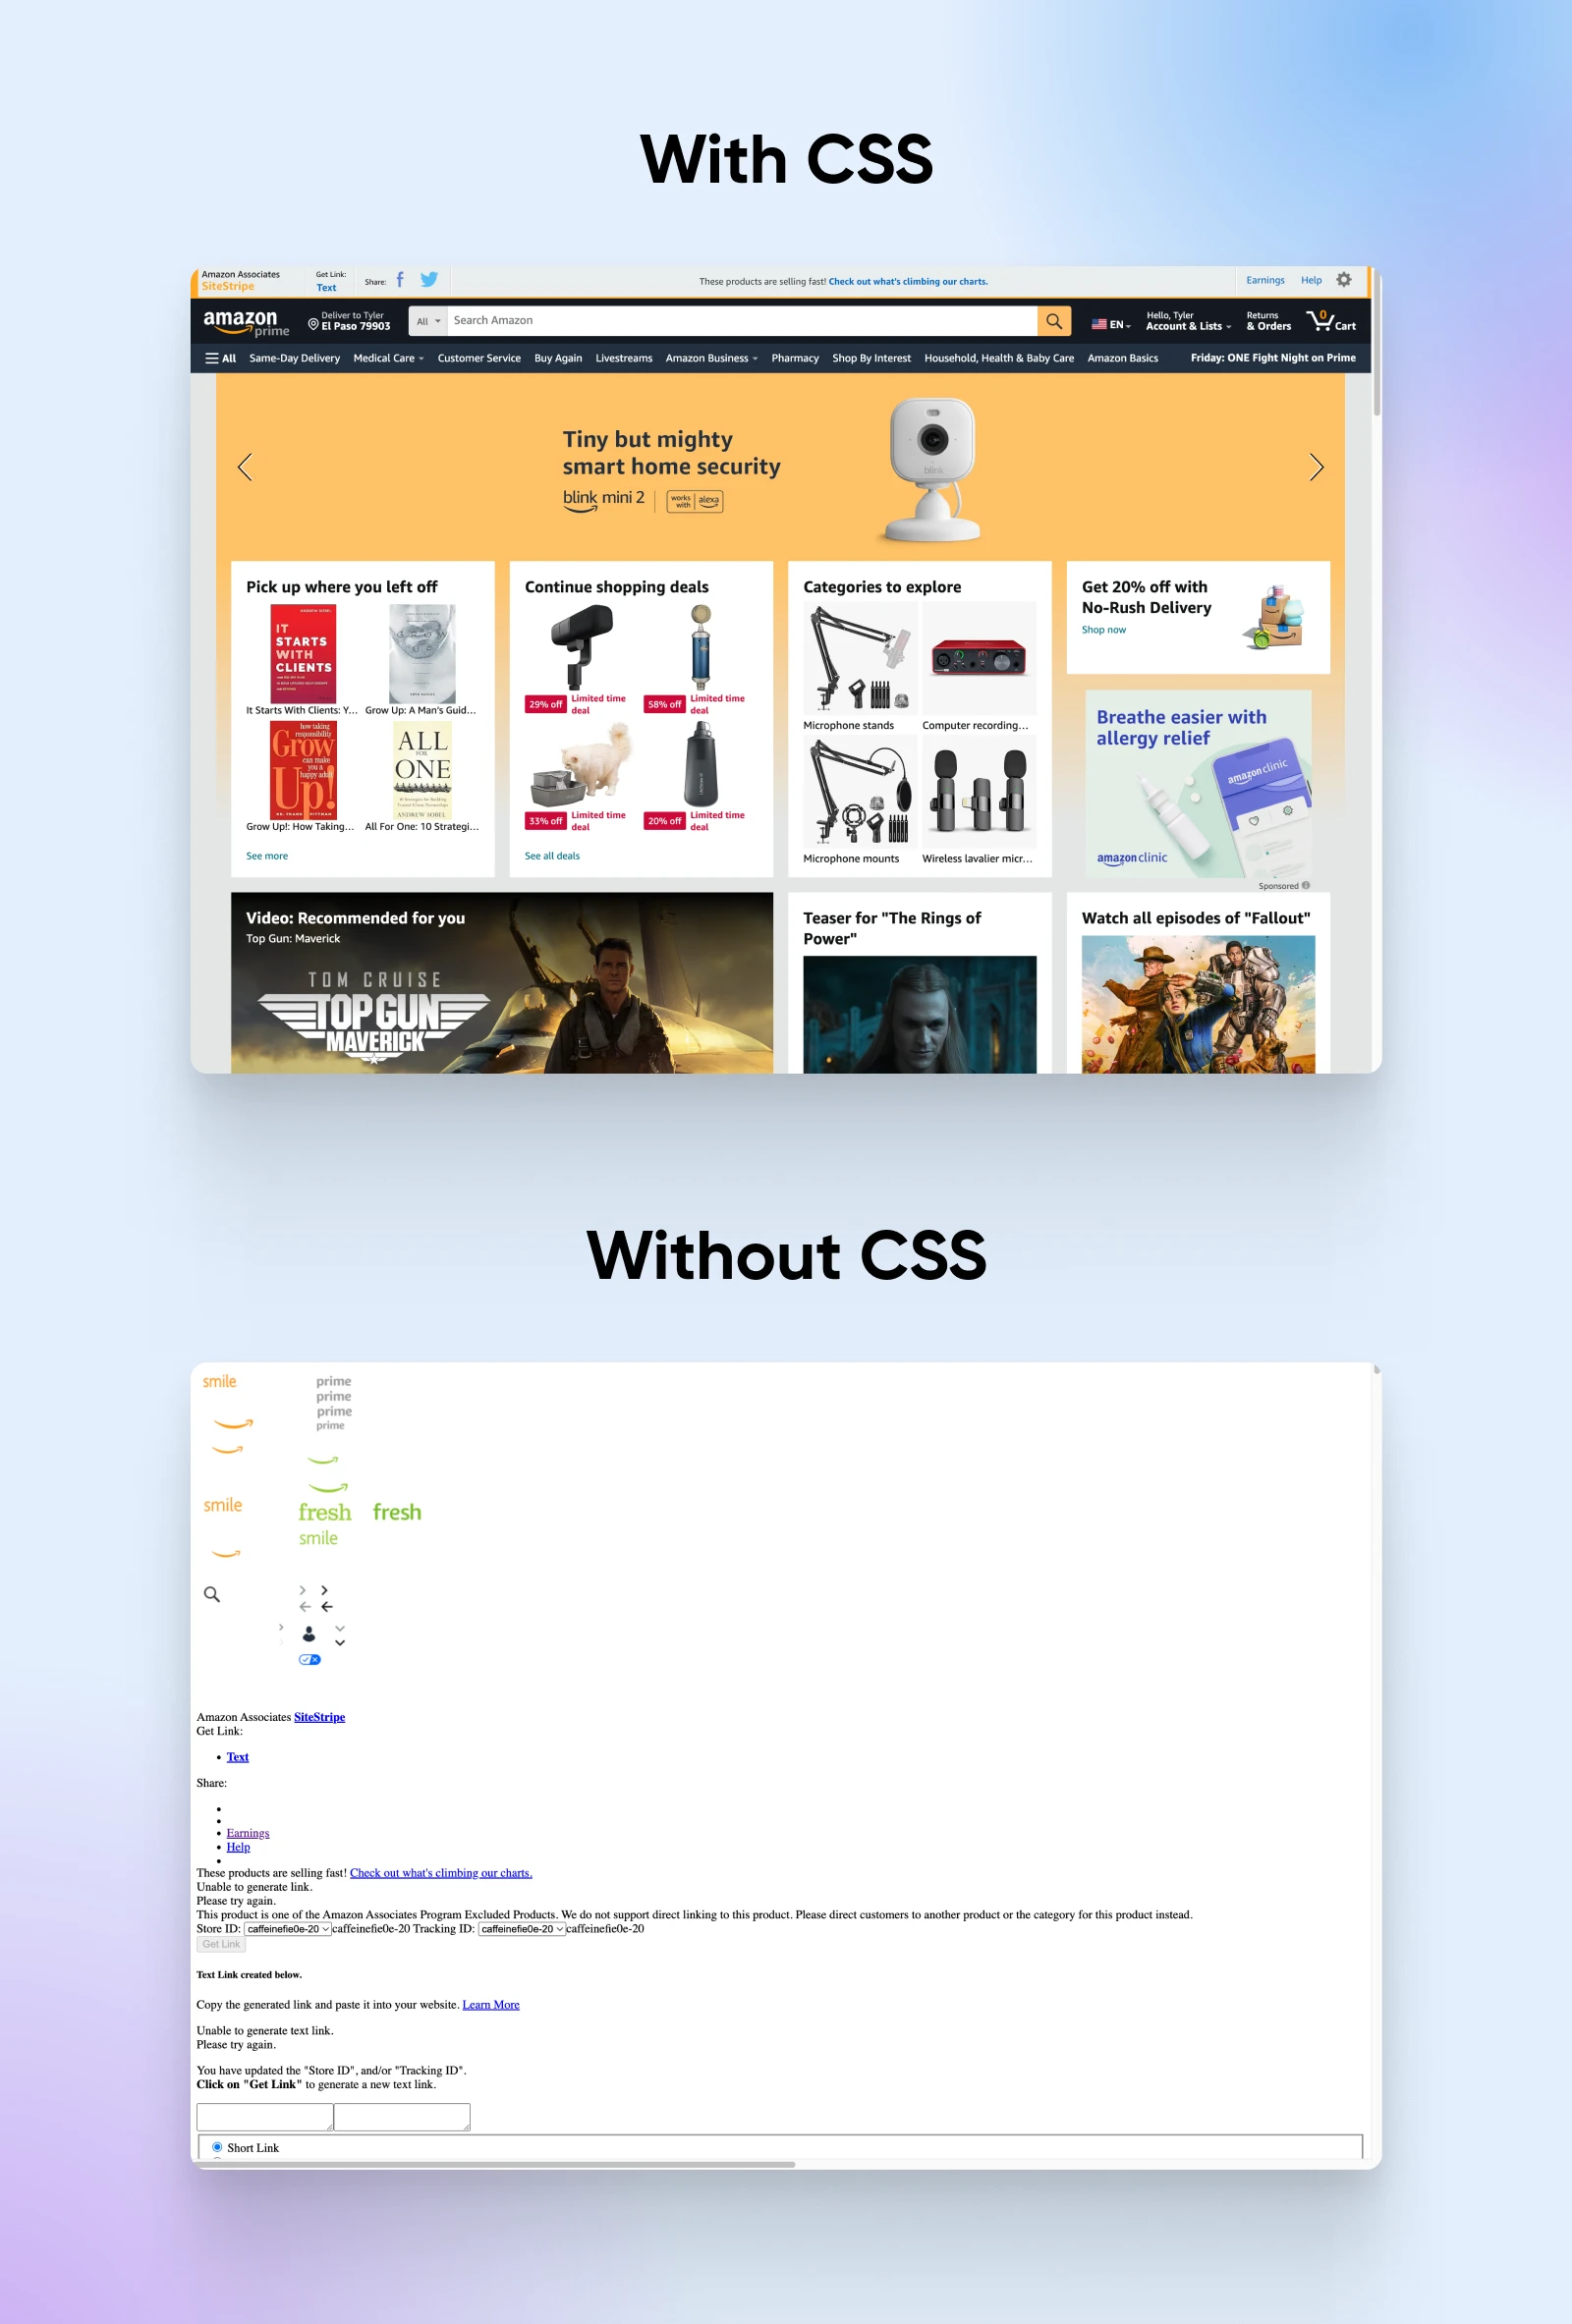 Side-by-side comparison of Amazon.com's homepage, one designed with CSS vs. without CSS.